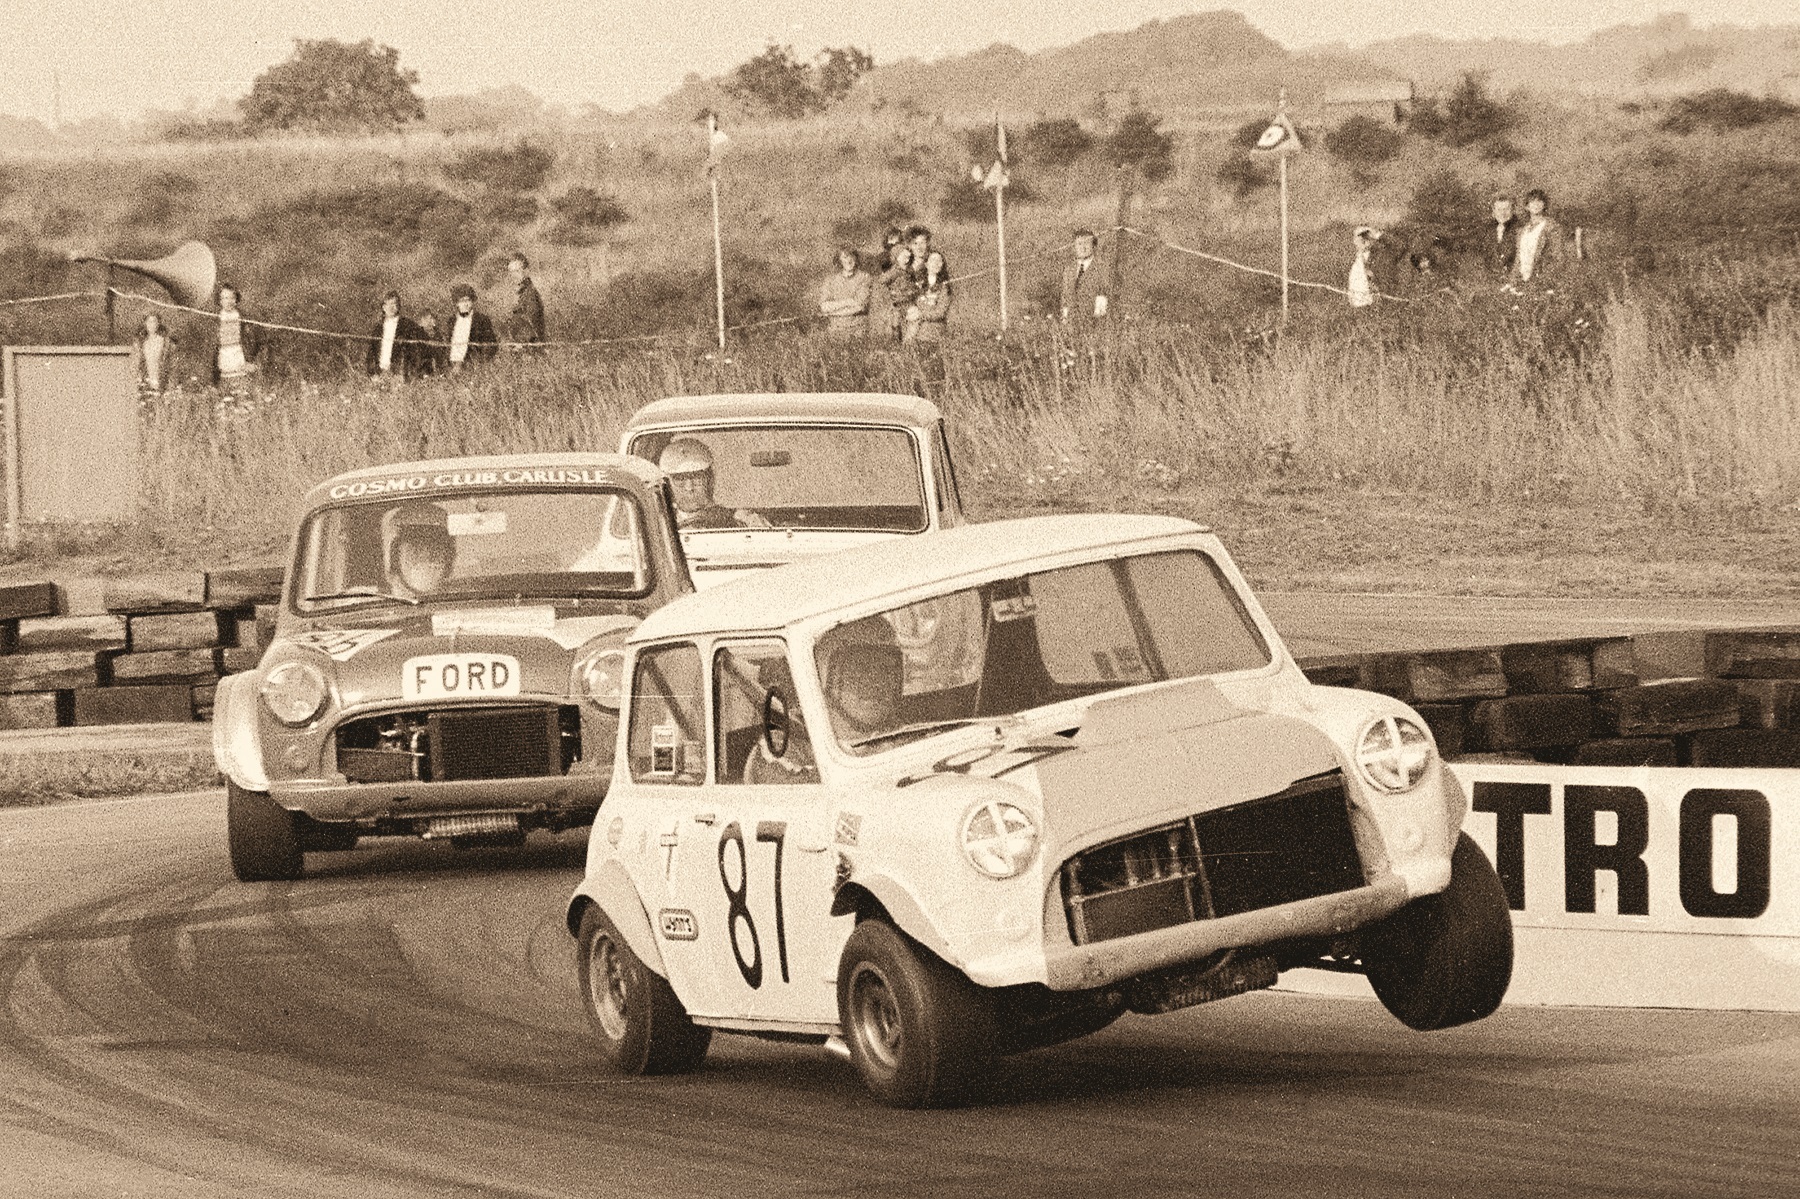 One of the famous BBC Show races at Croft in 1972: Andy Barton (999cc Mini Cooper S) leads Sedric Bell (MAE Ford-engined Mini) and Alex Clachers Hillman Imp through the chicane